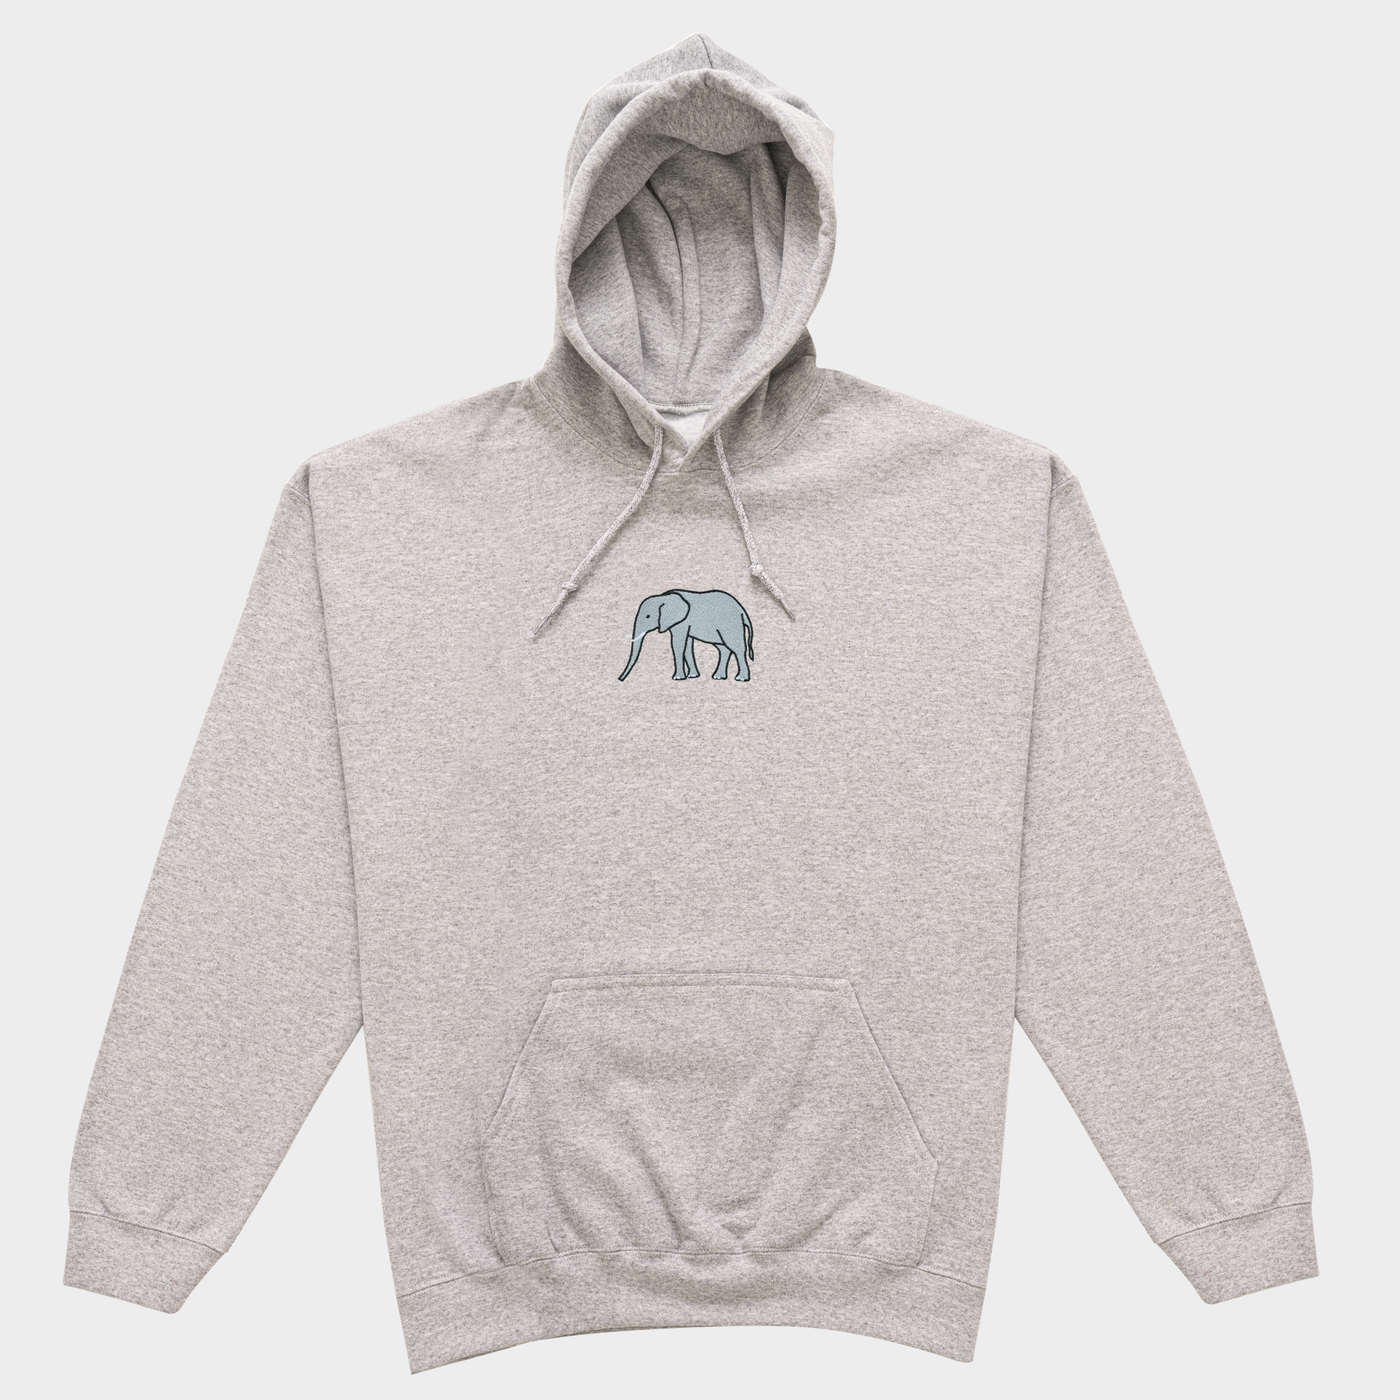 Bobby's Planet Men's Embroidered Elephant Hoodie from African Animals Collection in Sport Grey Color#color_sport-grey